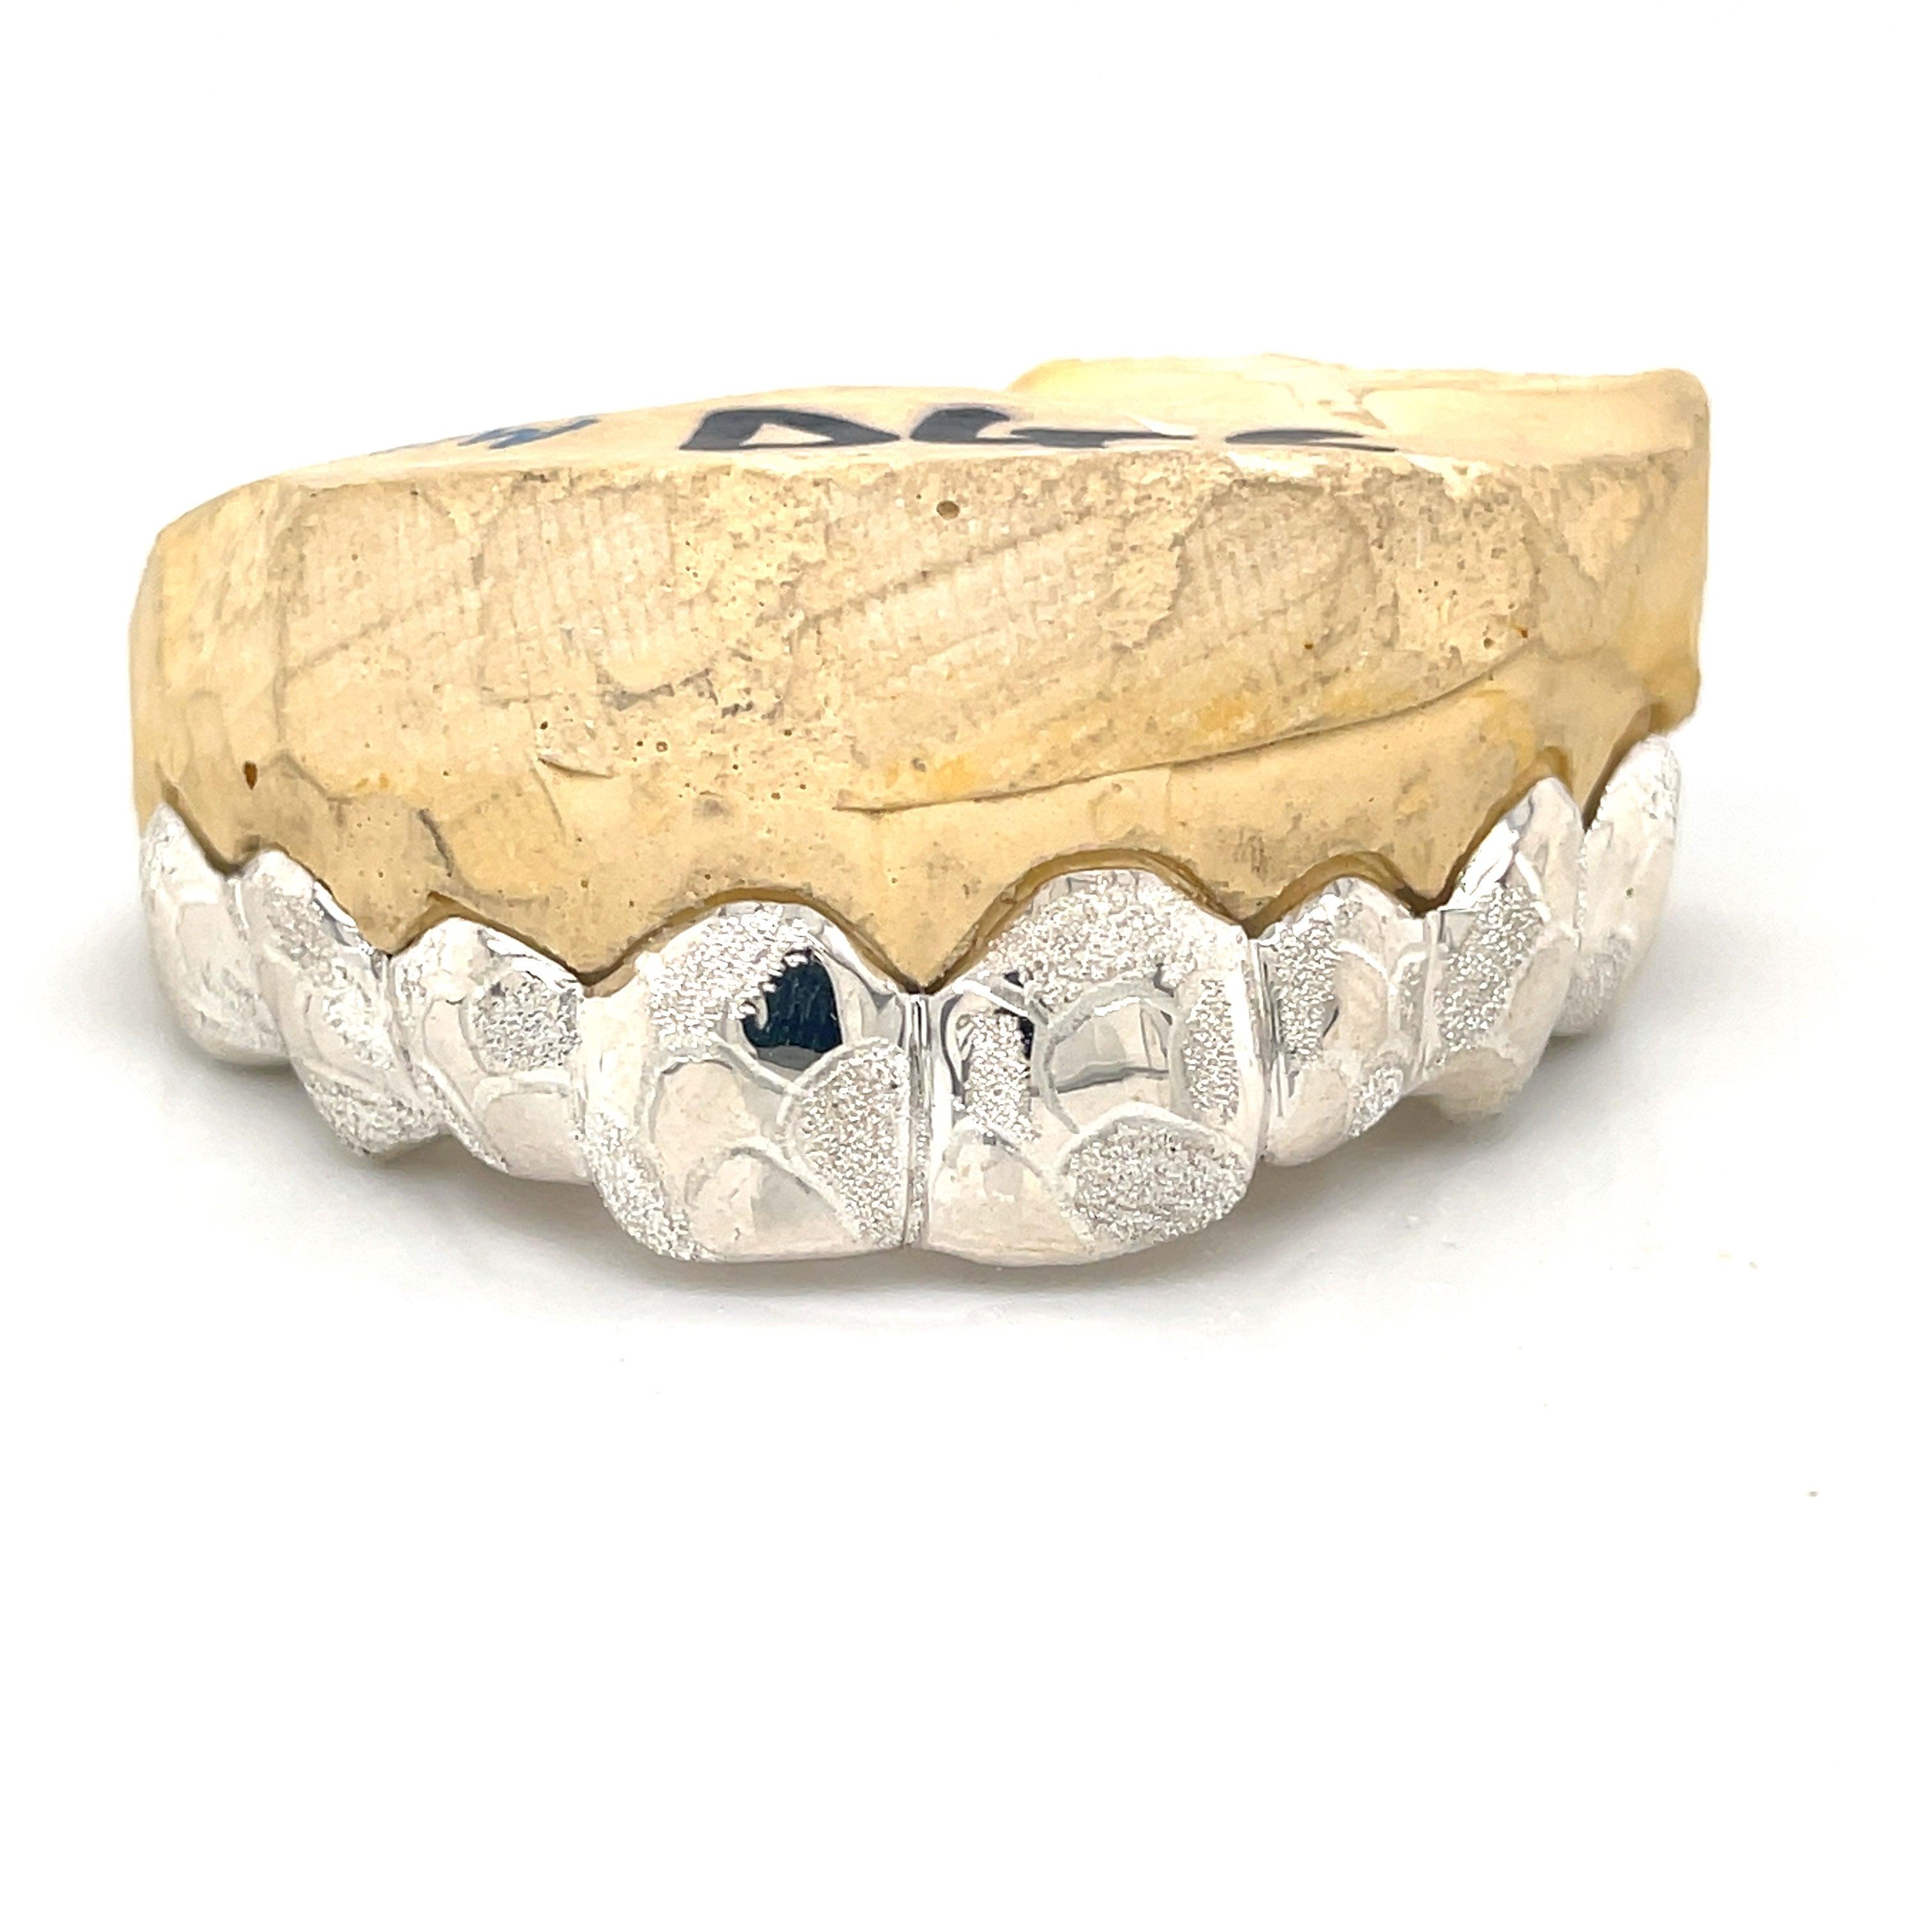 8pc Silver Earth Cut Top Grillz - Seattle Gold Grillz